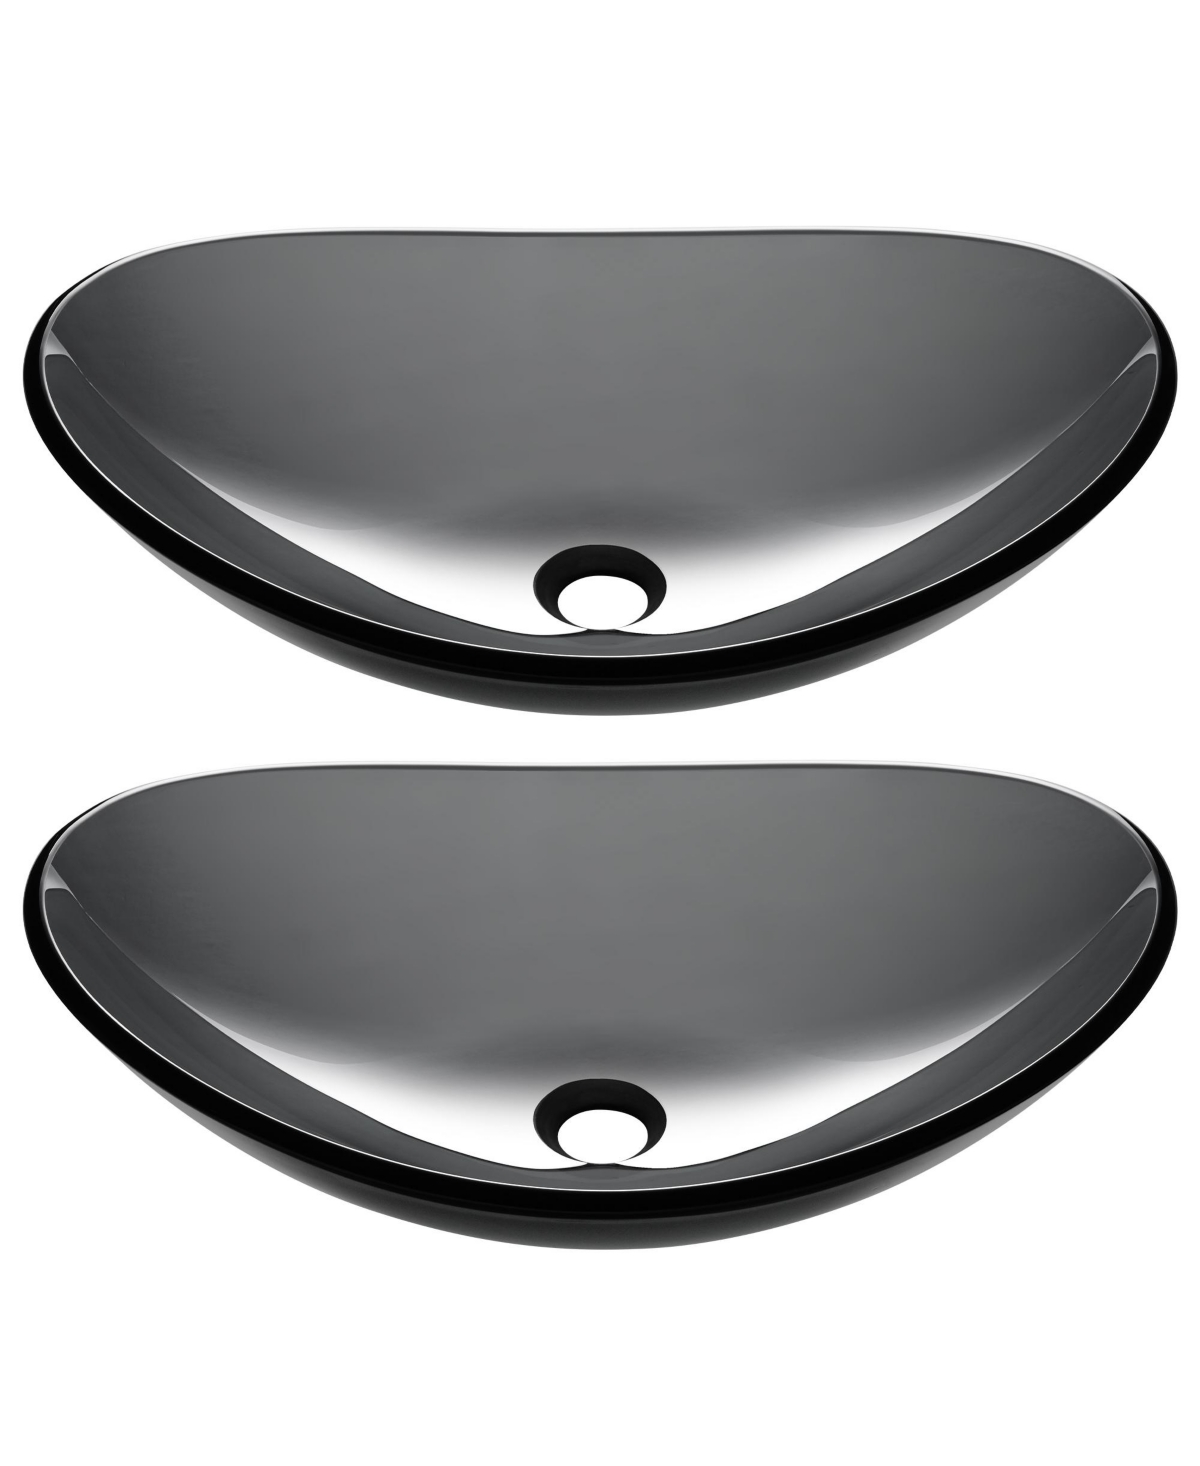 Bathroom Oval Tempered Glass Vessel Sink Counter Top Basin 2 Pack - Natural